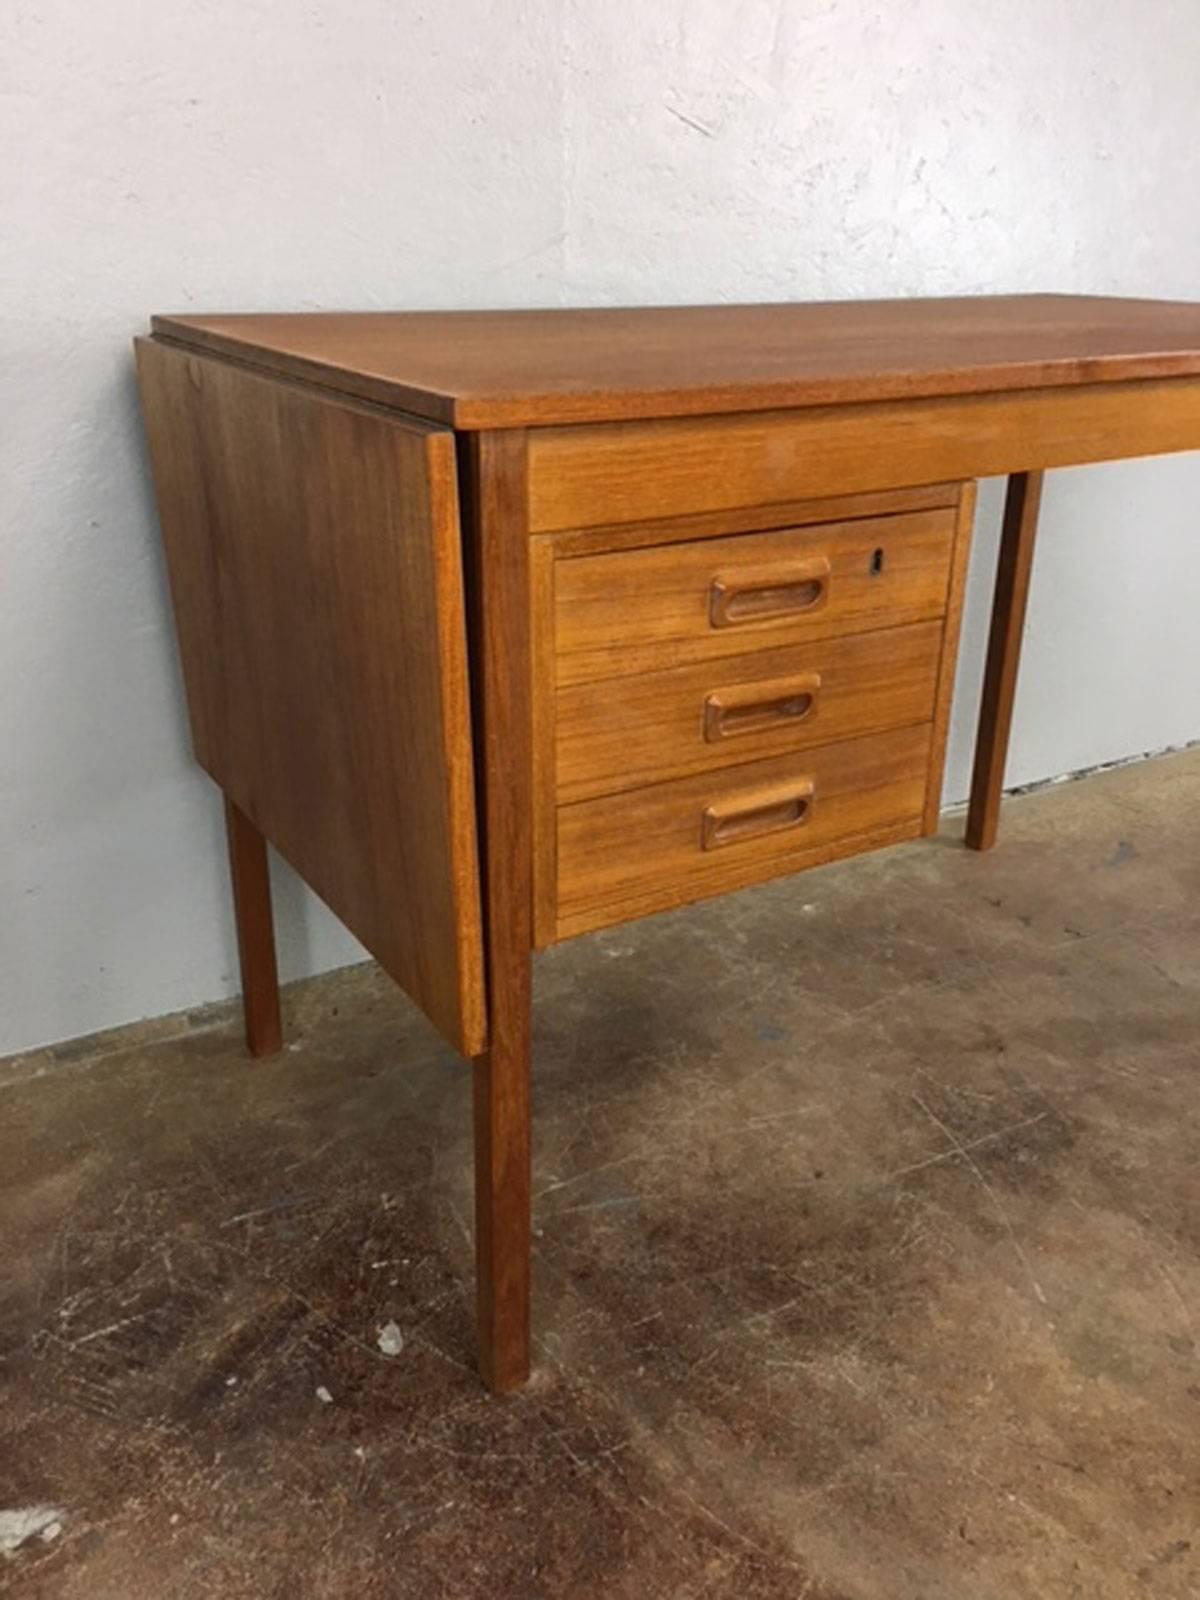 Unique drop-leaf desk in teak. Leaf folds up and then entire top slides into position to form one long top, if needed. Drawer locks. Nice clean piece. Measure: With leaf in down position this desk is 43 inches wide. 58 inches when leaf is in the